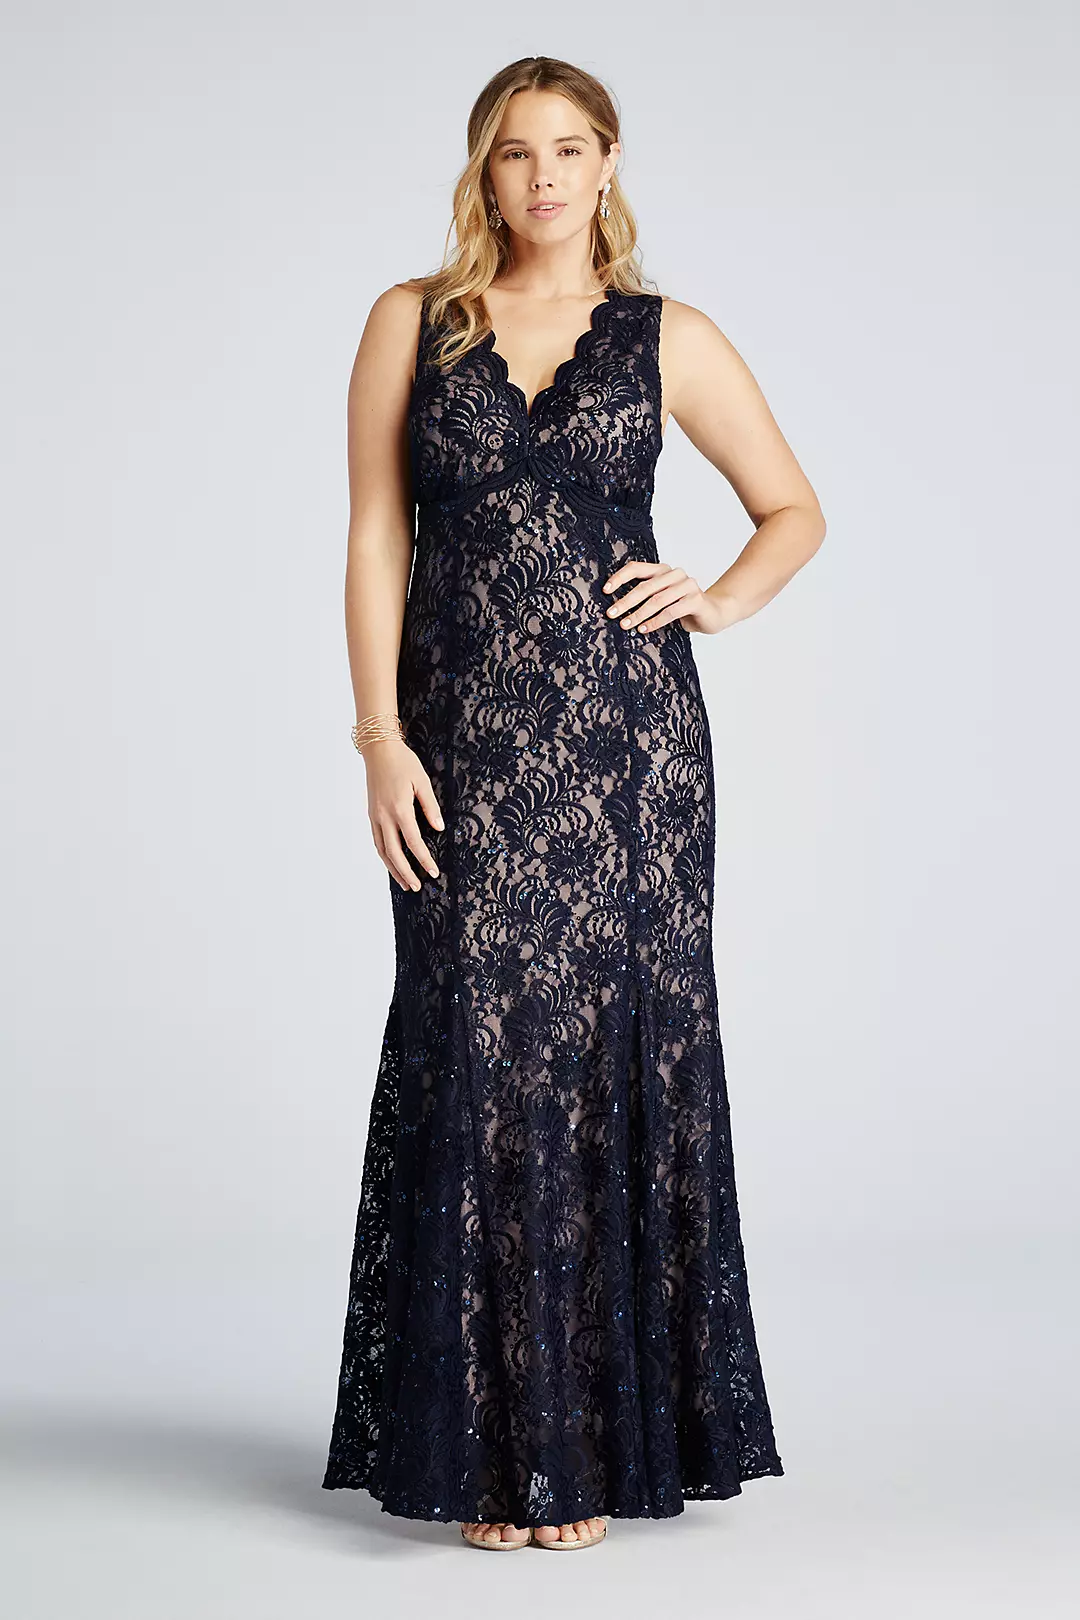 All Over Sequin Lace Dress with Open Back Image